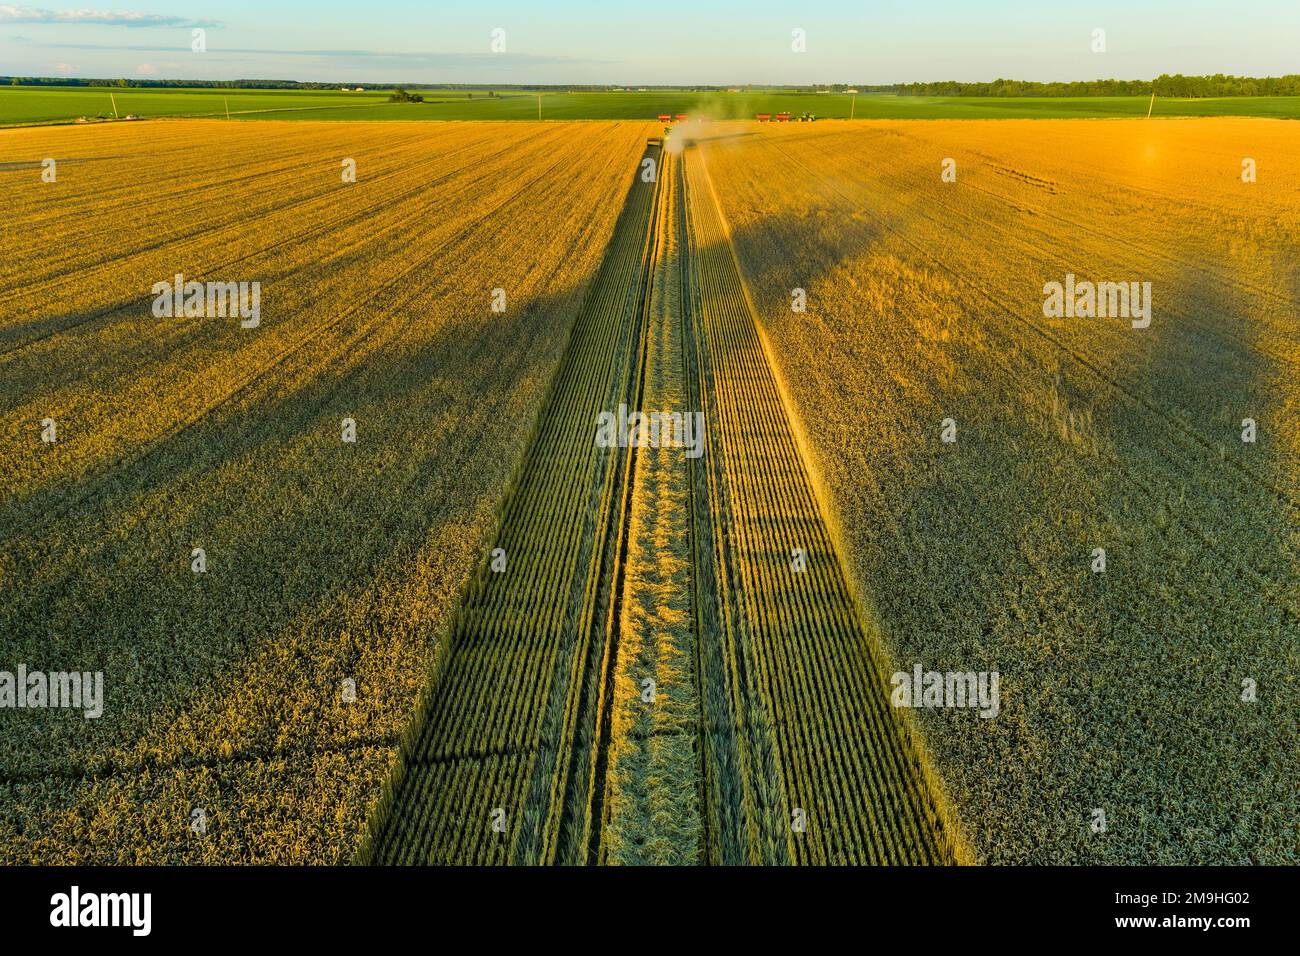 Aerial view of combine harvesting wheat at sunset, Marion County, Illinois, USA Stock Photo